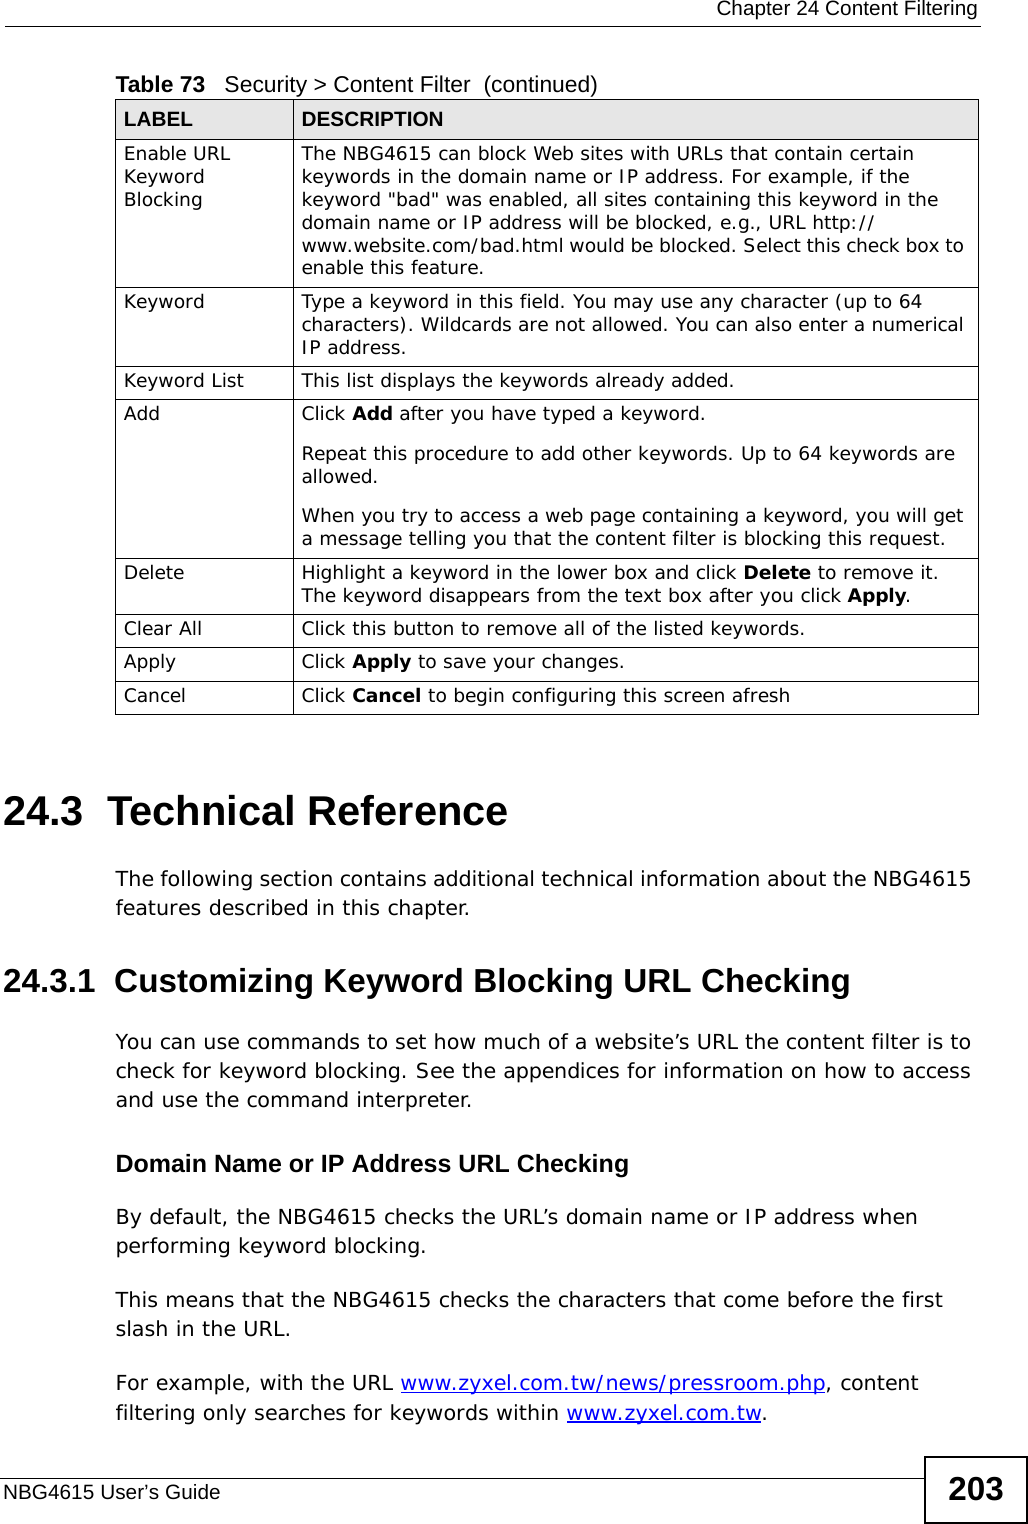  Chapter 24 Content FilteringNBG4615 User’s Guide 20324.3  Technical ReferenceThe following section contains additional technical information about the NBG4615 features described in this chapter.24.3.1  Customizing Keyword Blocking URL CheckingYou can use commands to set how much of a website’s URL the content filter is to check for keyword blocking. See the appendices for information on how to access and use the command interpreter.Domain Name or IP Address URL CheckingBy default, the NBG4615 checks the URL’s domain name or IP address when performing keyword blocking.This means that the NBG4615 checks the characters that come before the first slash in the URL.For example, with the URL www.zyxel.com.tw/news/pressroom.php, content filtering only searches for keywords within www.zyxel.com.tw.Enable URL Keyword BlockingThe NBG4615 can block Web sites with URLs that contain certain keywords in the domain name or IP address. For example, if the keyword &quot;bad&quot; was enabled, all sites containing this keyword in the domain name or IP address will be blocked, e.g., URL http://www.website.com/bad.html would be blocked. Select this check box to enable this feature.Keyword Type a keyword in this field. You may use any character (up to 64 characters). Wildcards are not allowed. You can also enter a numerical IP address.Keyword List This list displays the keywords already added. Add  Click Add after you have typed a keyword. Repeat this procedure to add other keywords. Up to 64 keywords are allowed.When you try to access a web page containing a keyword, you will get a message telling you that the content filter is blocking this request.Delete Highlight a keyword in the lower box and click Delete to remove it. The keyword disappears from the text box after you click Apply.Clear All Click this button to remove all of the listed keywords.Apply Click Apply to save your changes.Cancel Click Cancel to begin configuring this screen afreshTable 73   Security &gt; Content Filter  (continued)LABEL DESCRIPTION